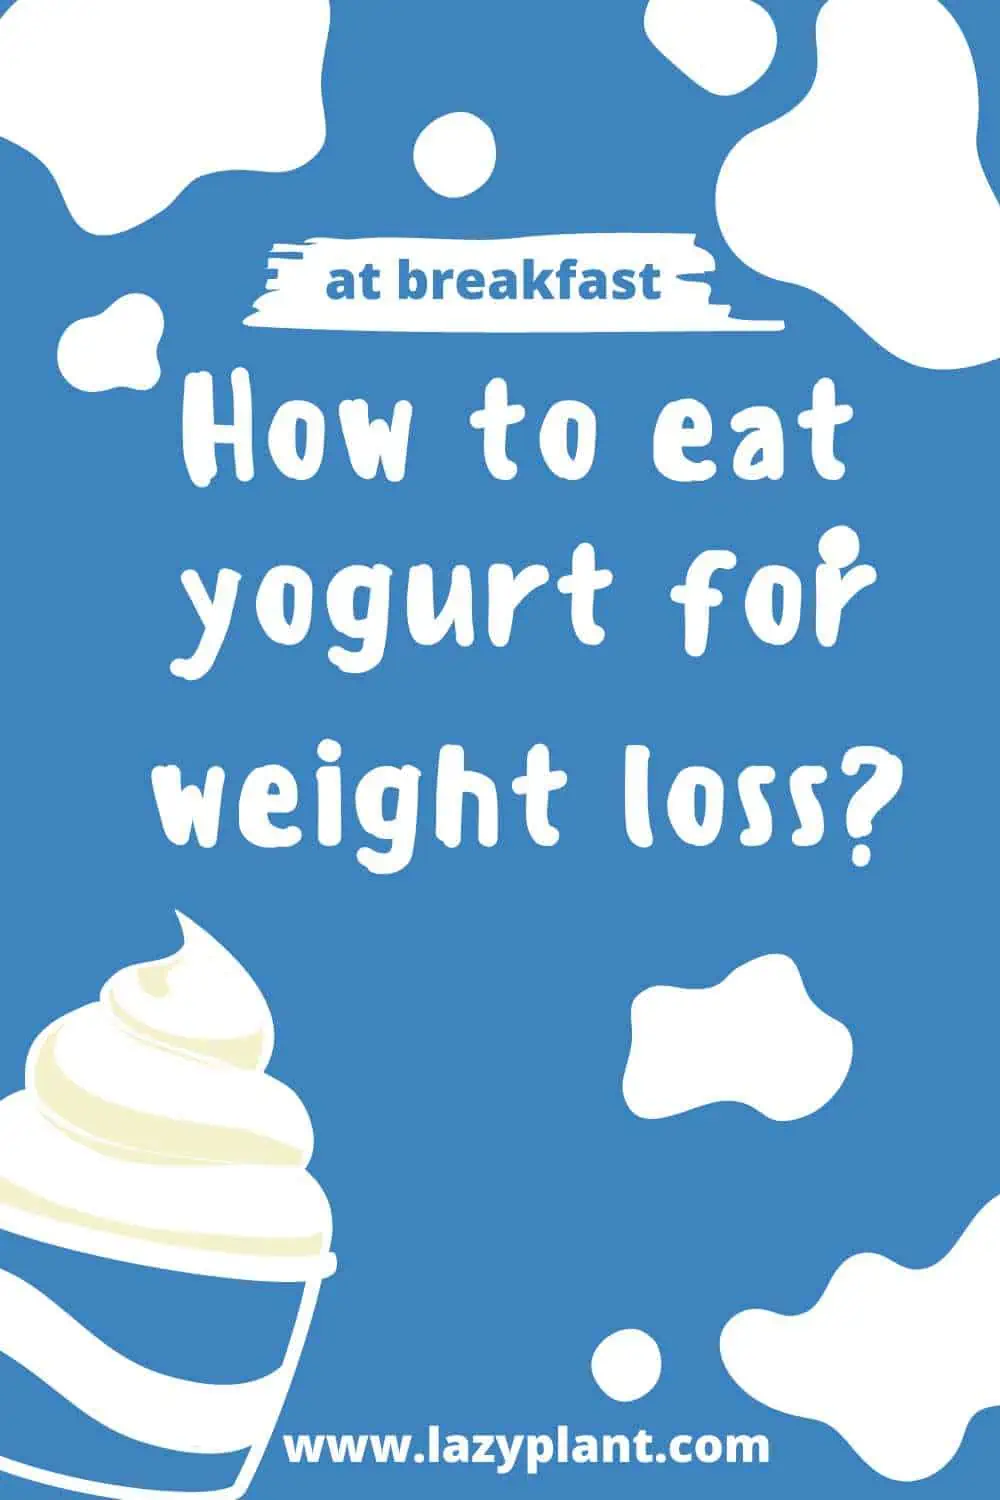 How to pair plain yogurt at breakfast for a lean body?